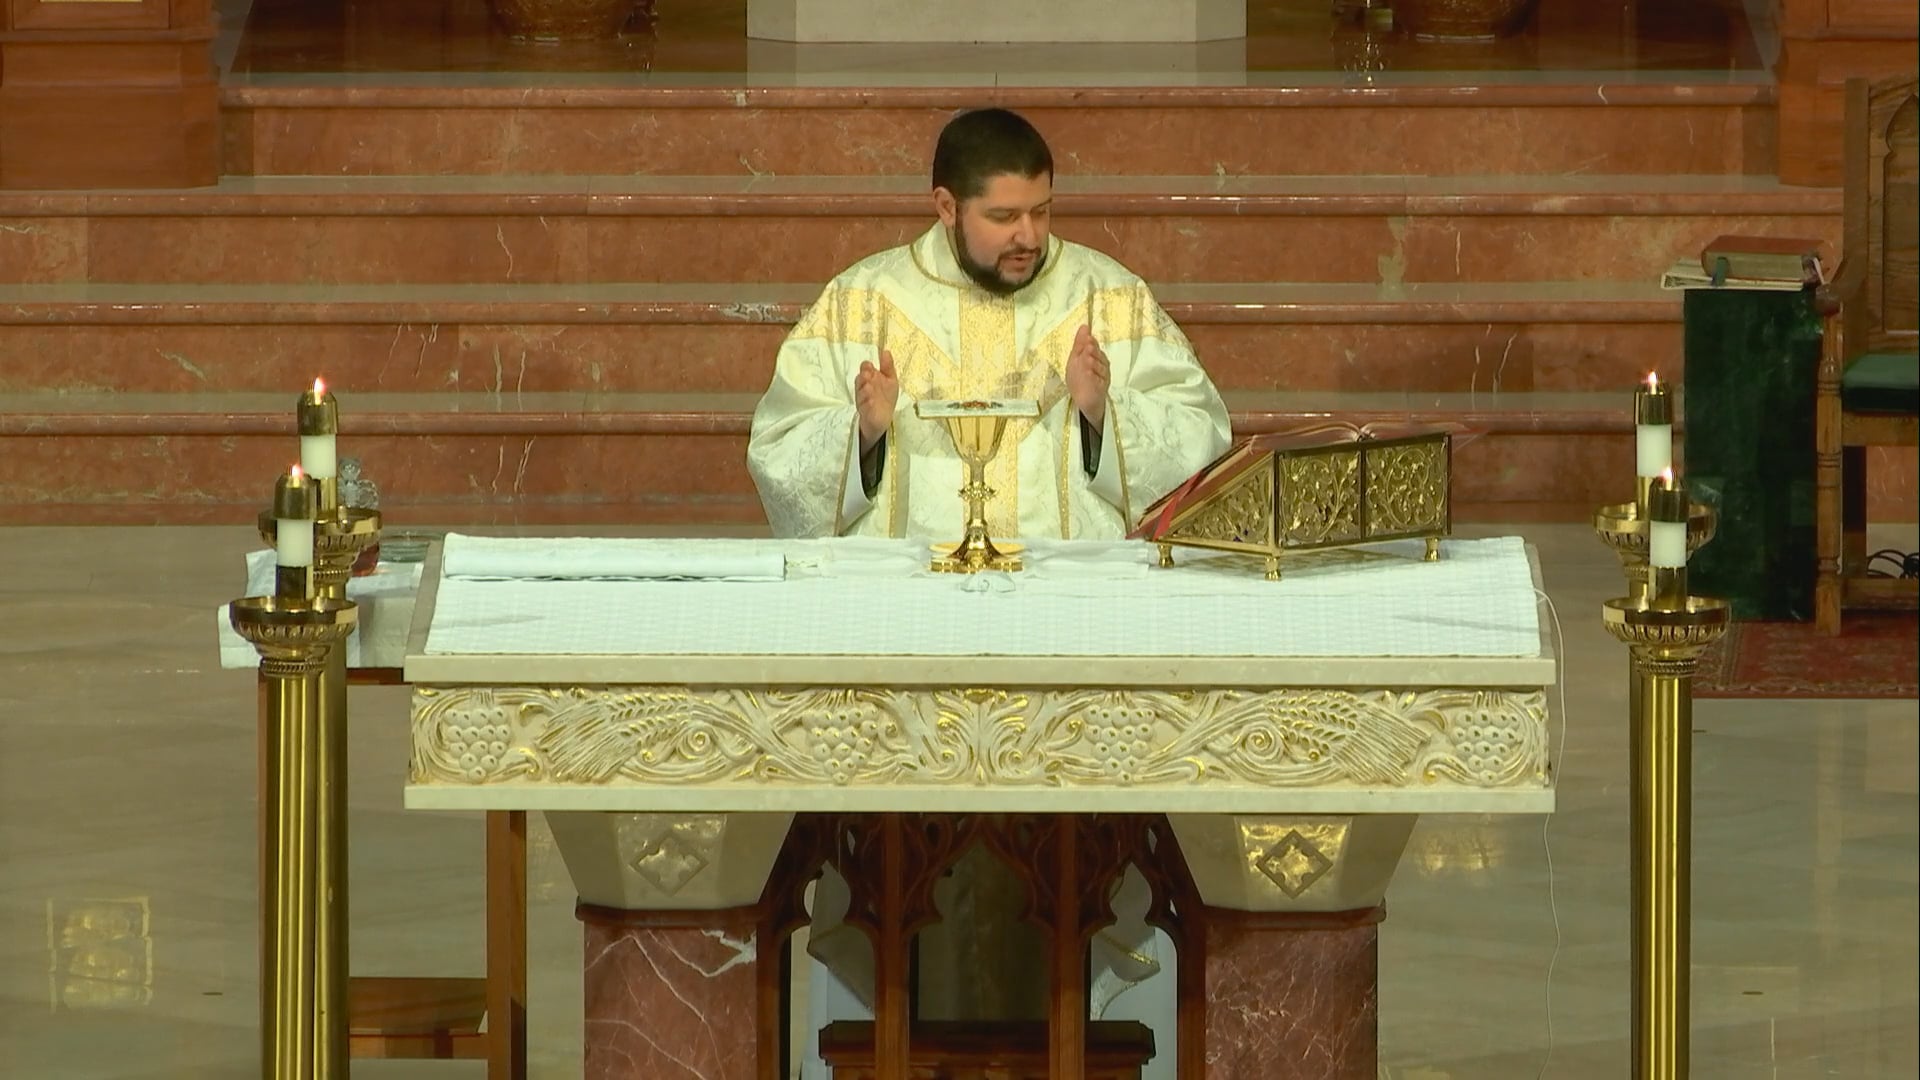 Mass from St. Agnes Cathedral - January 26, 2023